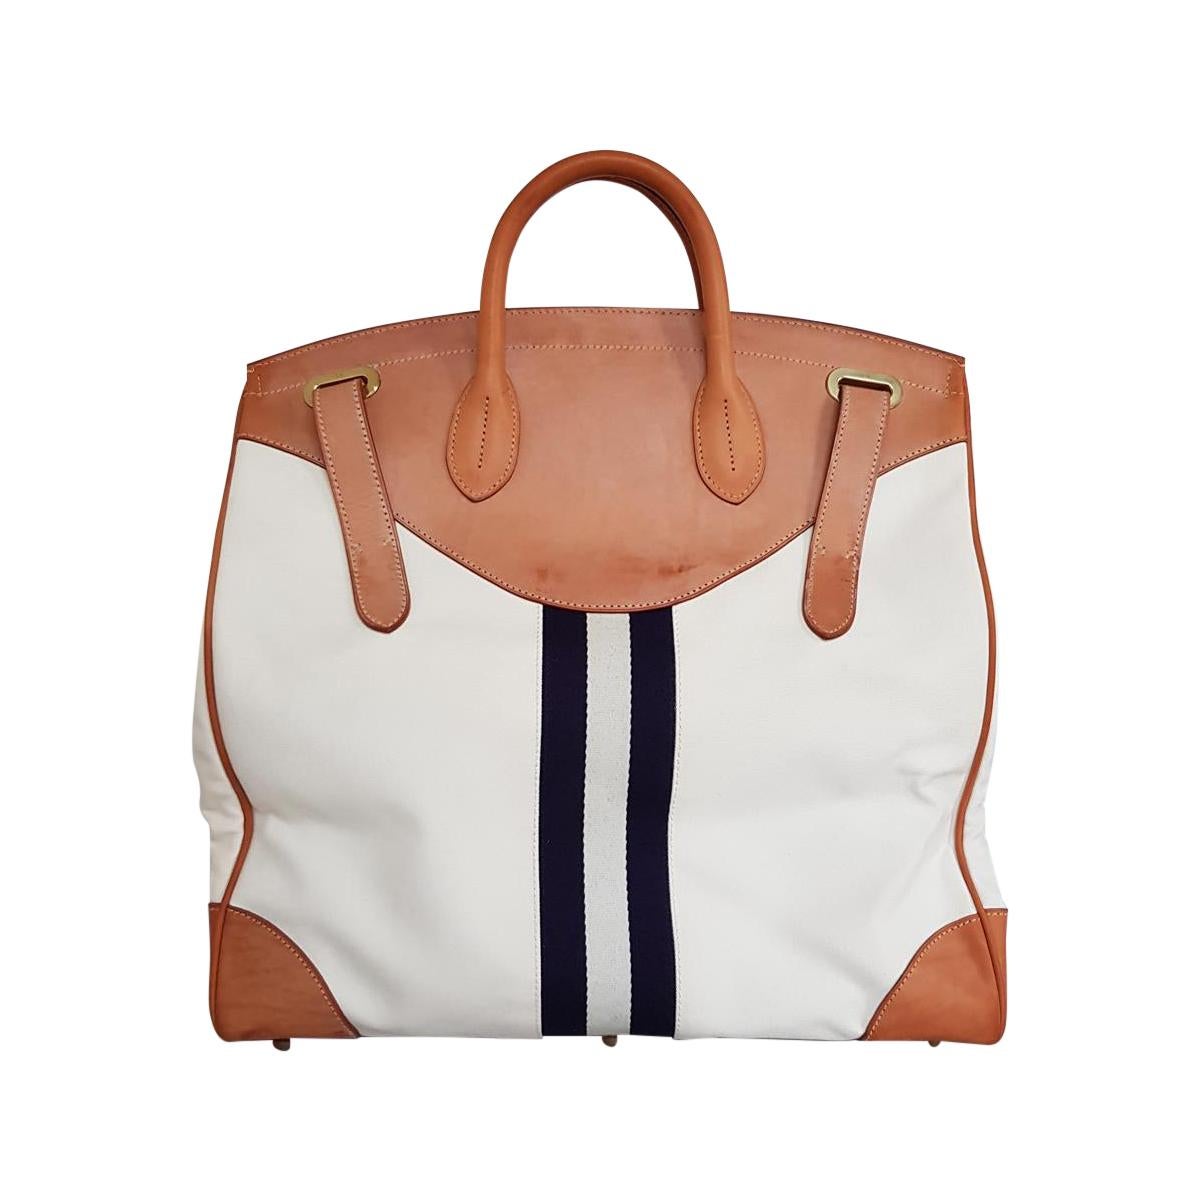 Wonderful travel bag by Ralph Lauren
RL Cooper travel bag
Leather
White cream Aramis canvas
Blue stripes
Two handles
Golden hardware
Double internal large pockets (one with zip)
Perfect for short holidays
Cm 47 x 47 x 20 (18.5 x 18.5 x 7.8